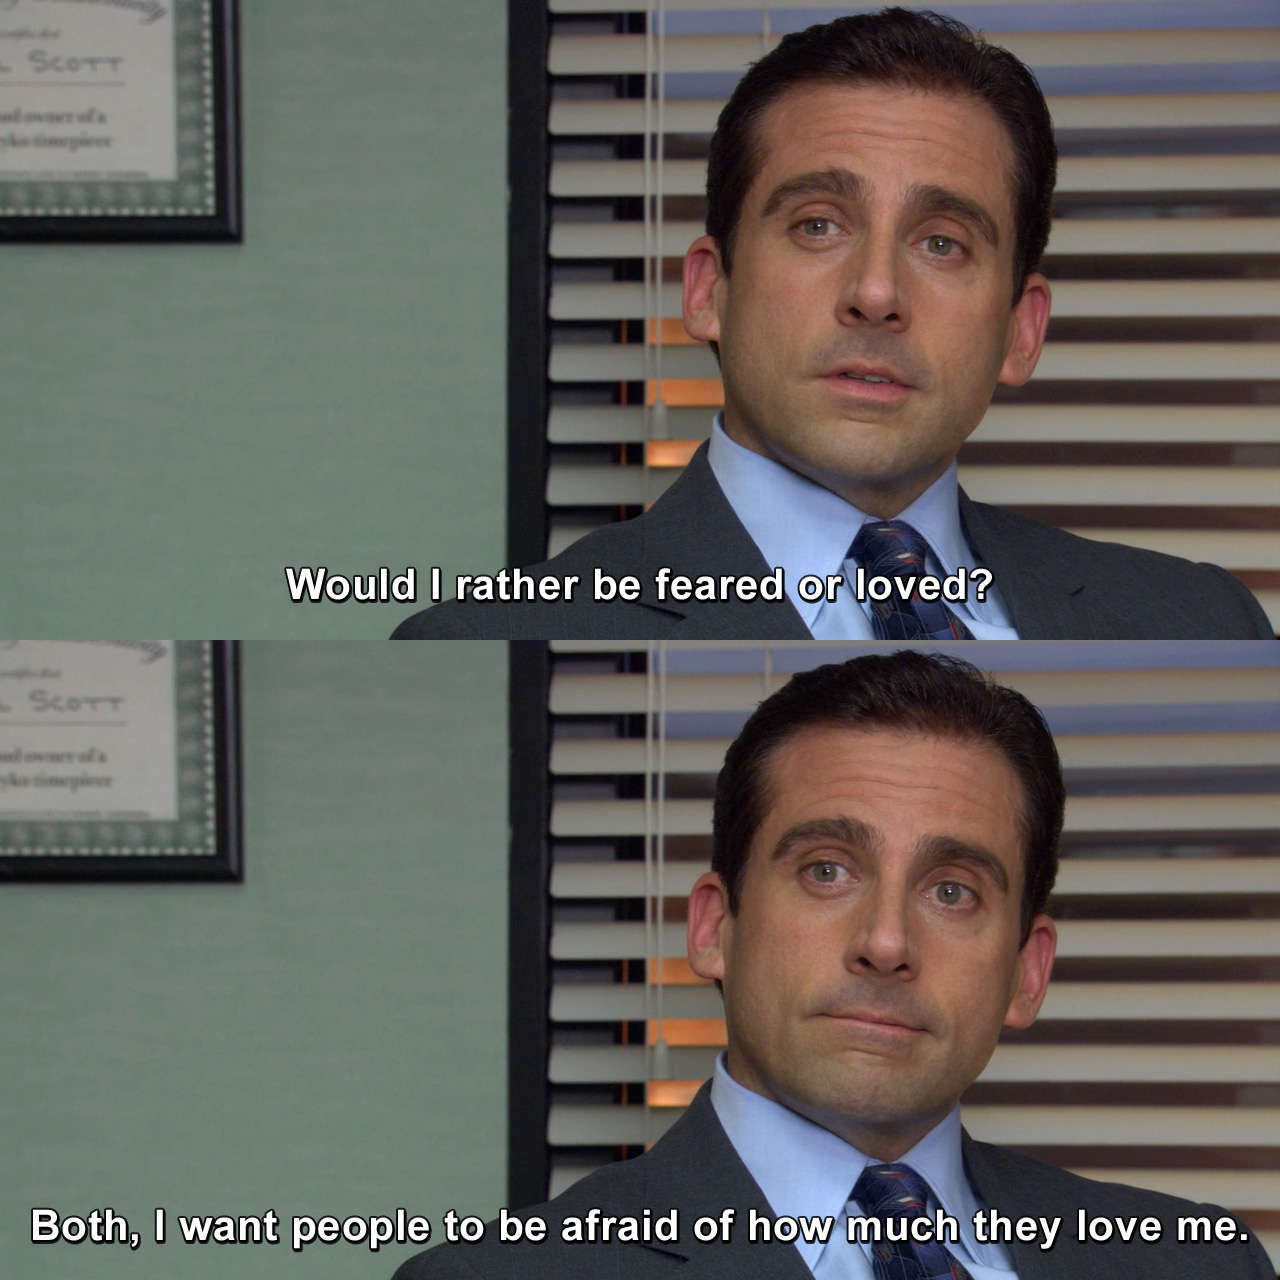 Michael Scott from "The Office" scene where he says, "Would I rather be feared or loved? Both. I want people to be afaid of how much they love me."